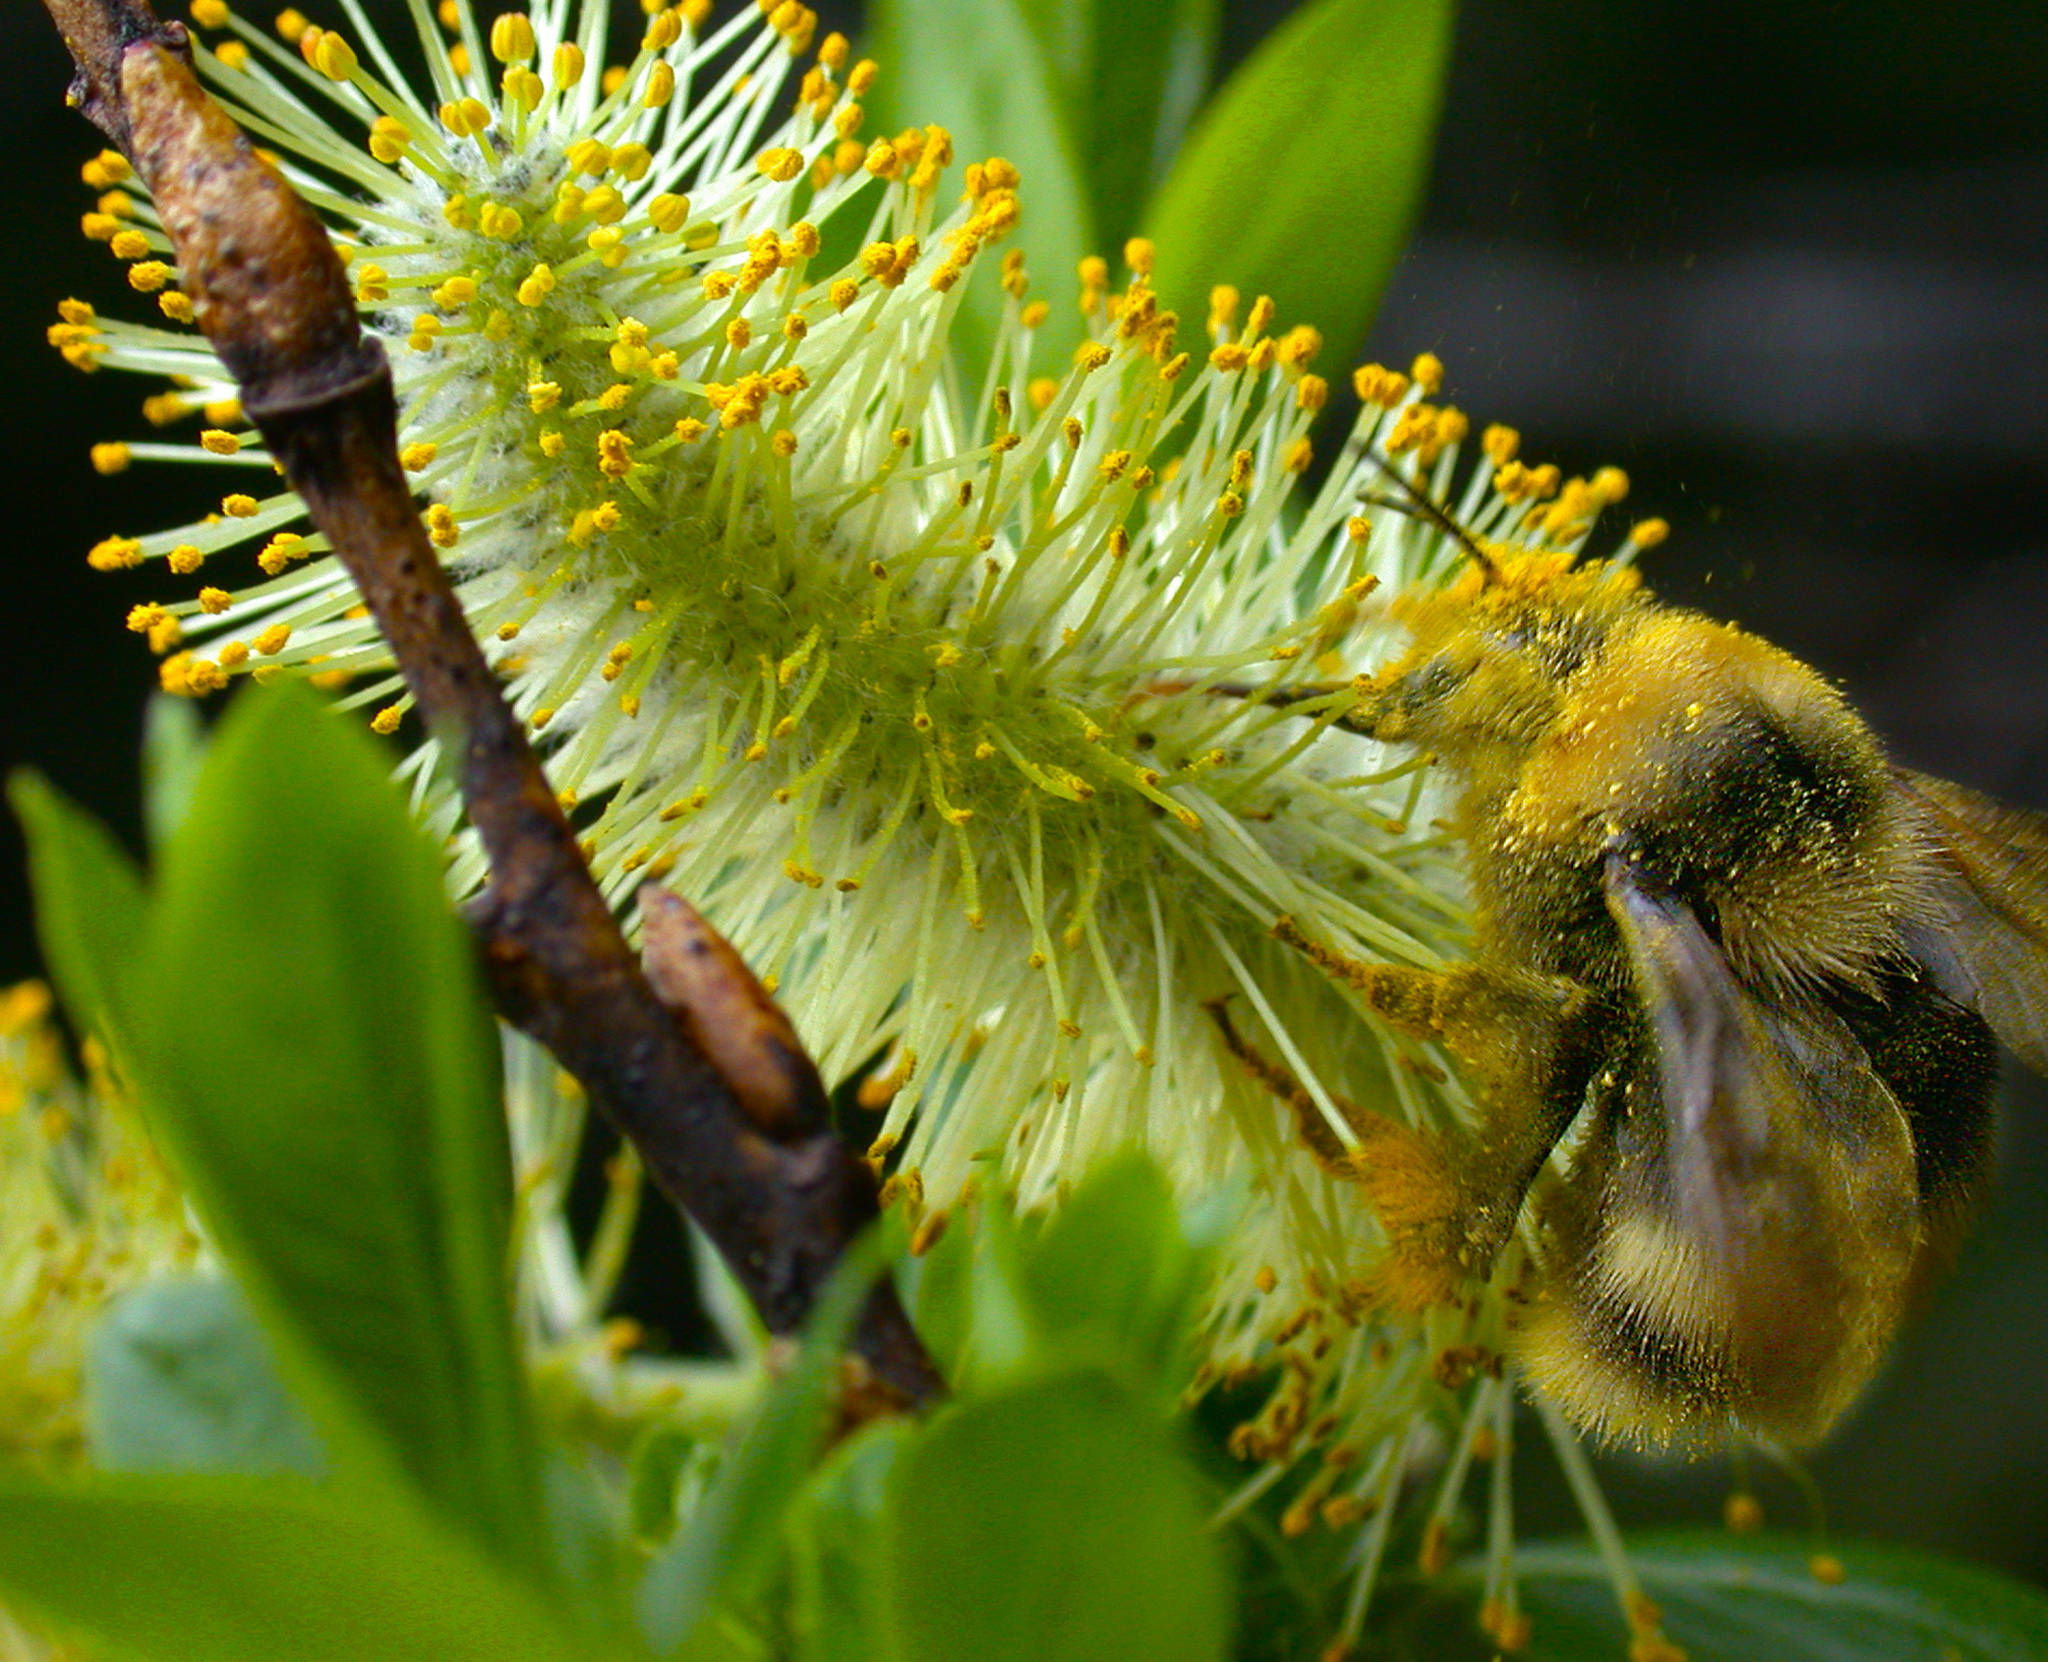 A queen bumblebee, dusted with pollen, forages on a male willow catkin. (Courtesy photo)